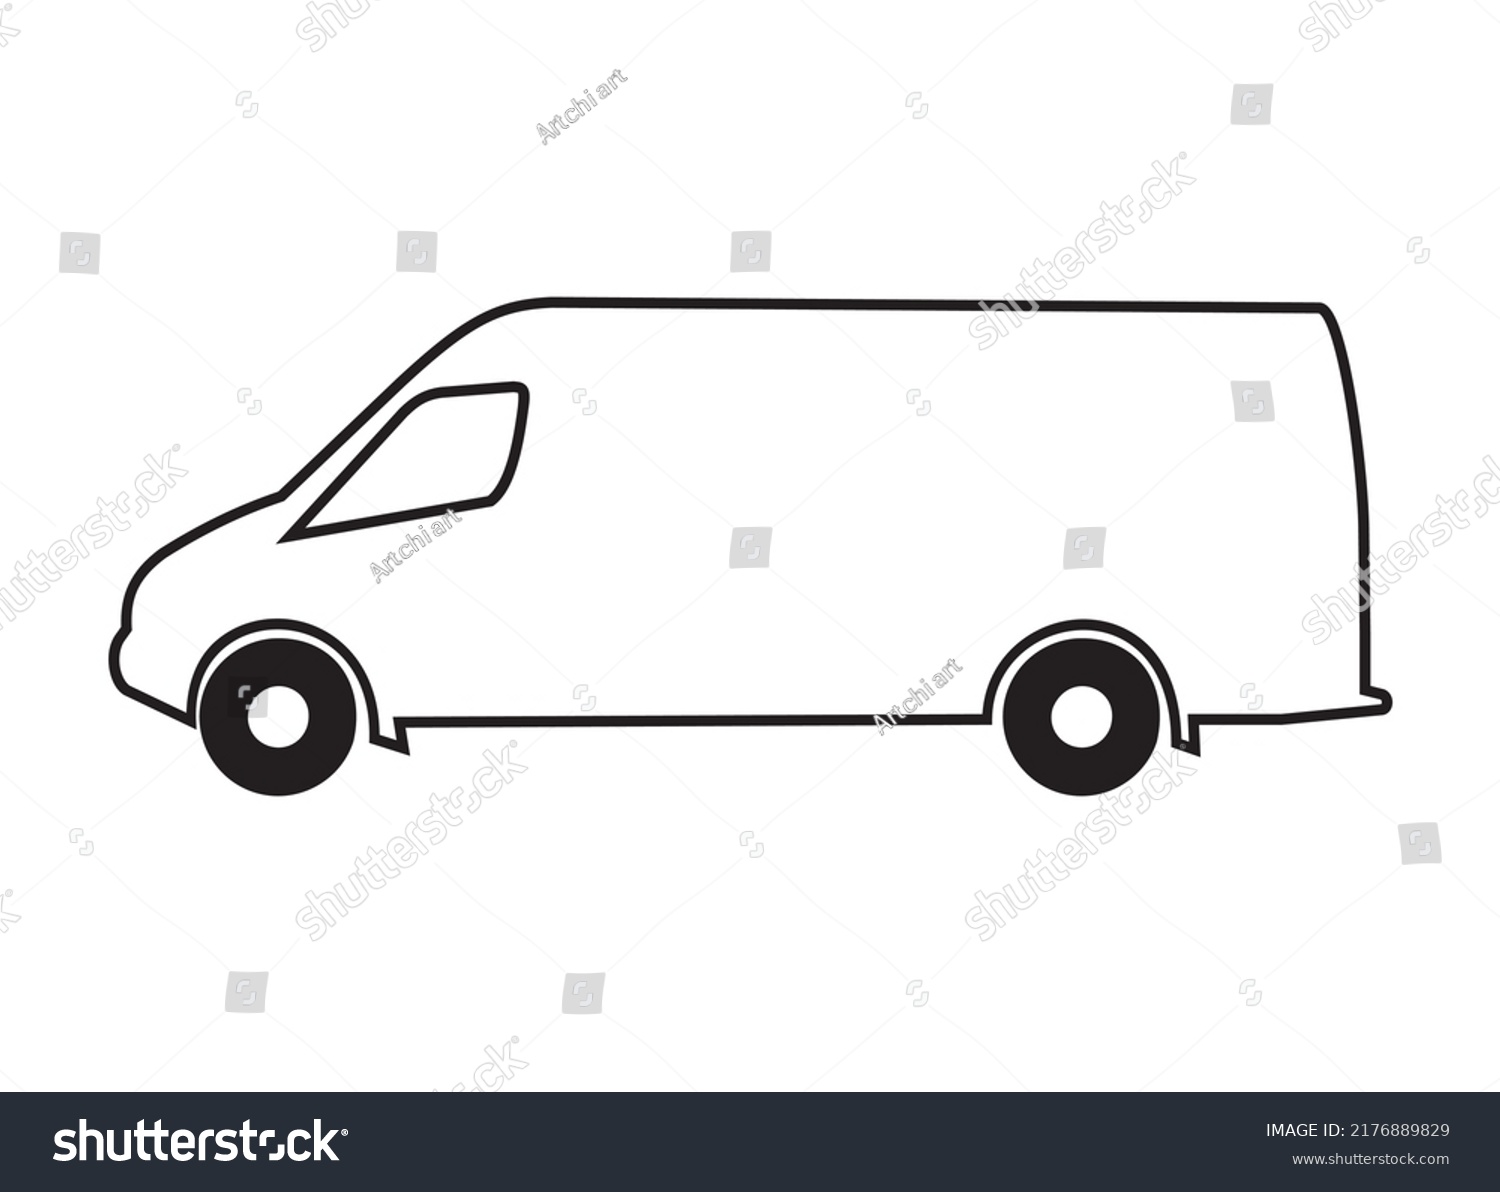 Van Simple Side Outline Drawing Illustration Stock Vector (Royalty Free ...